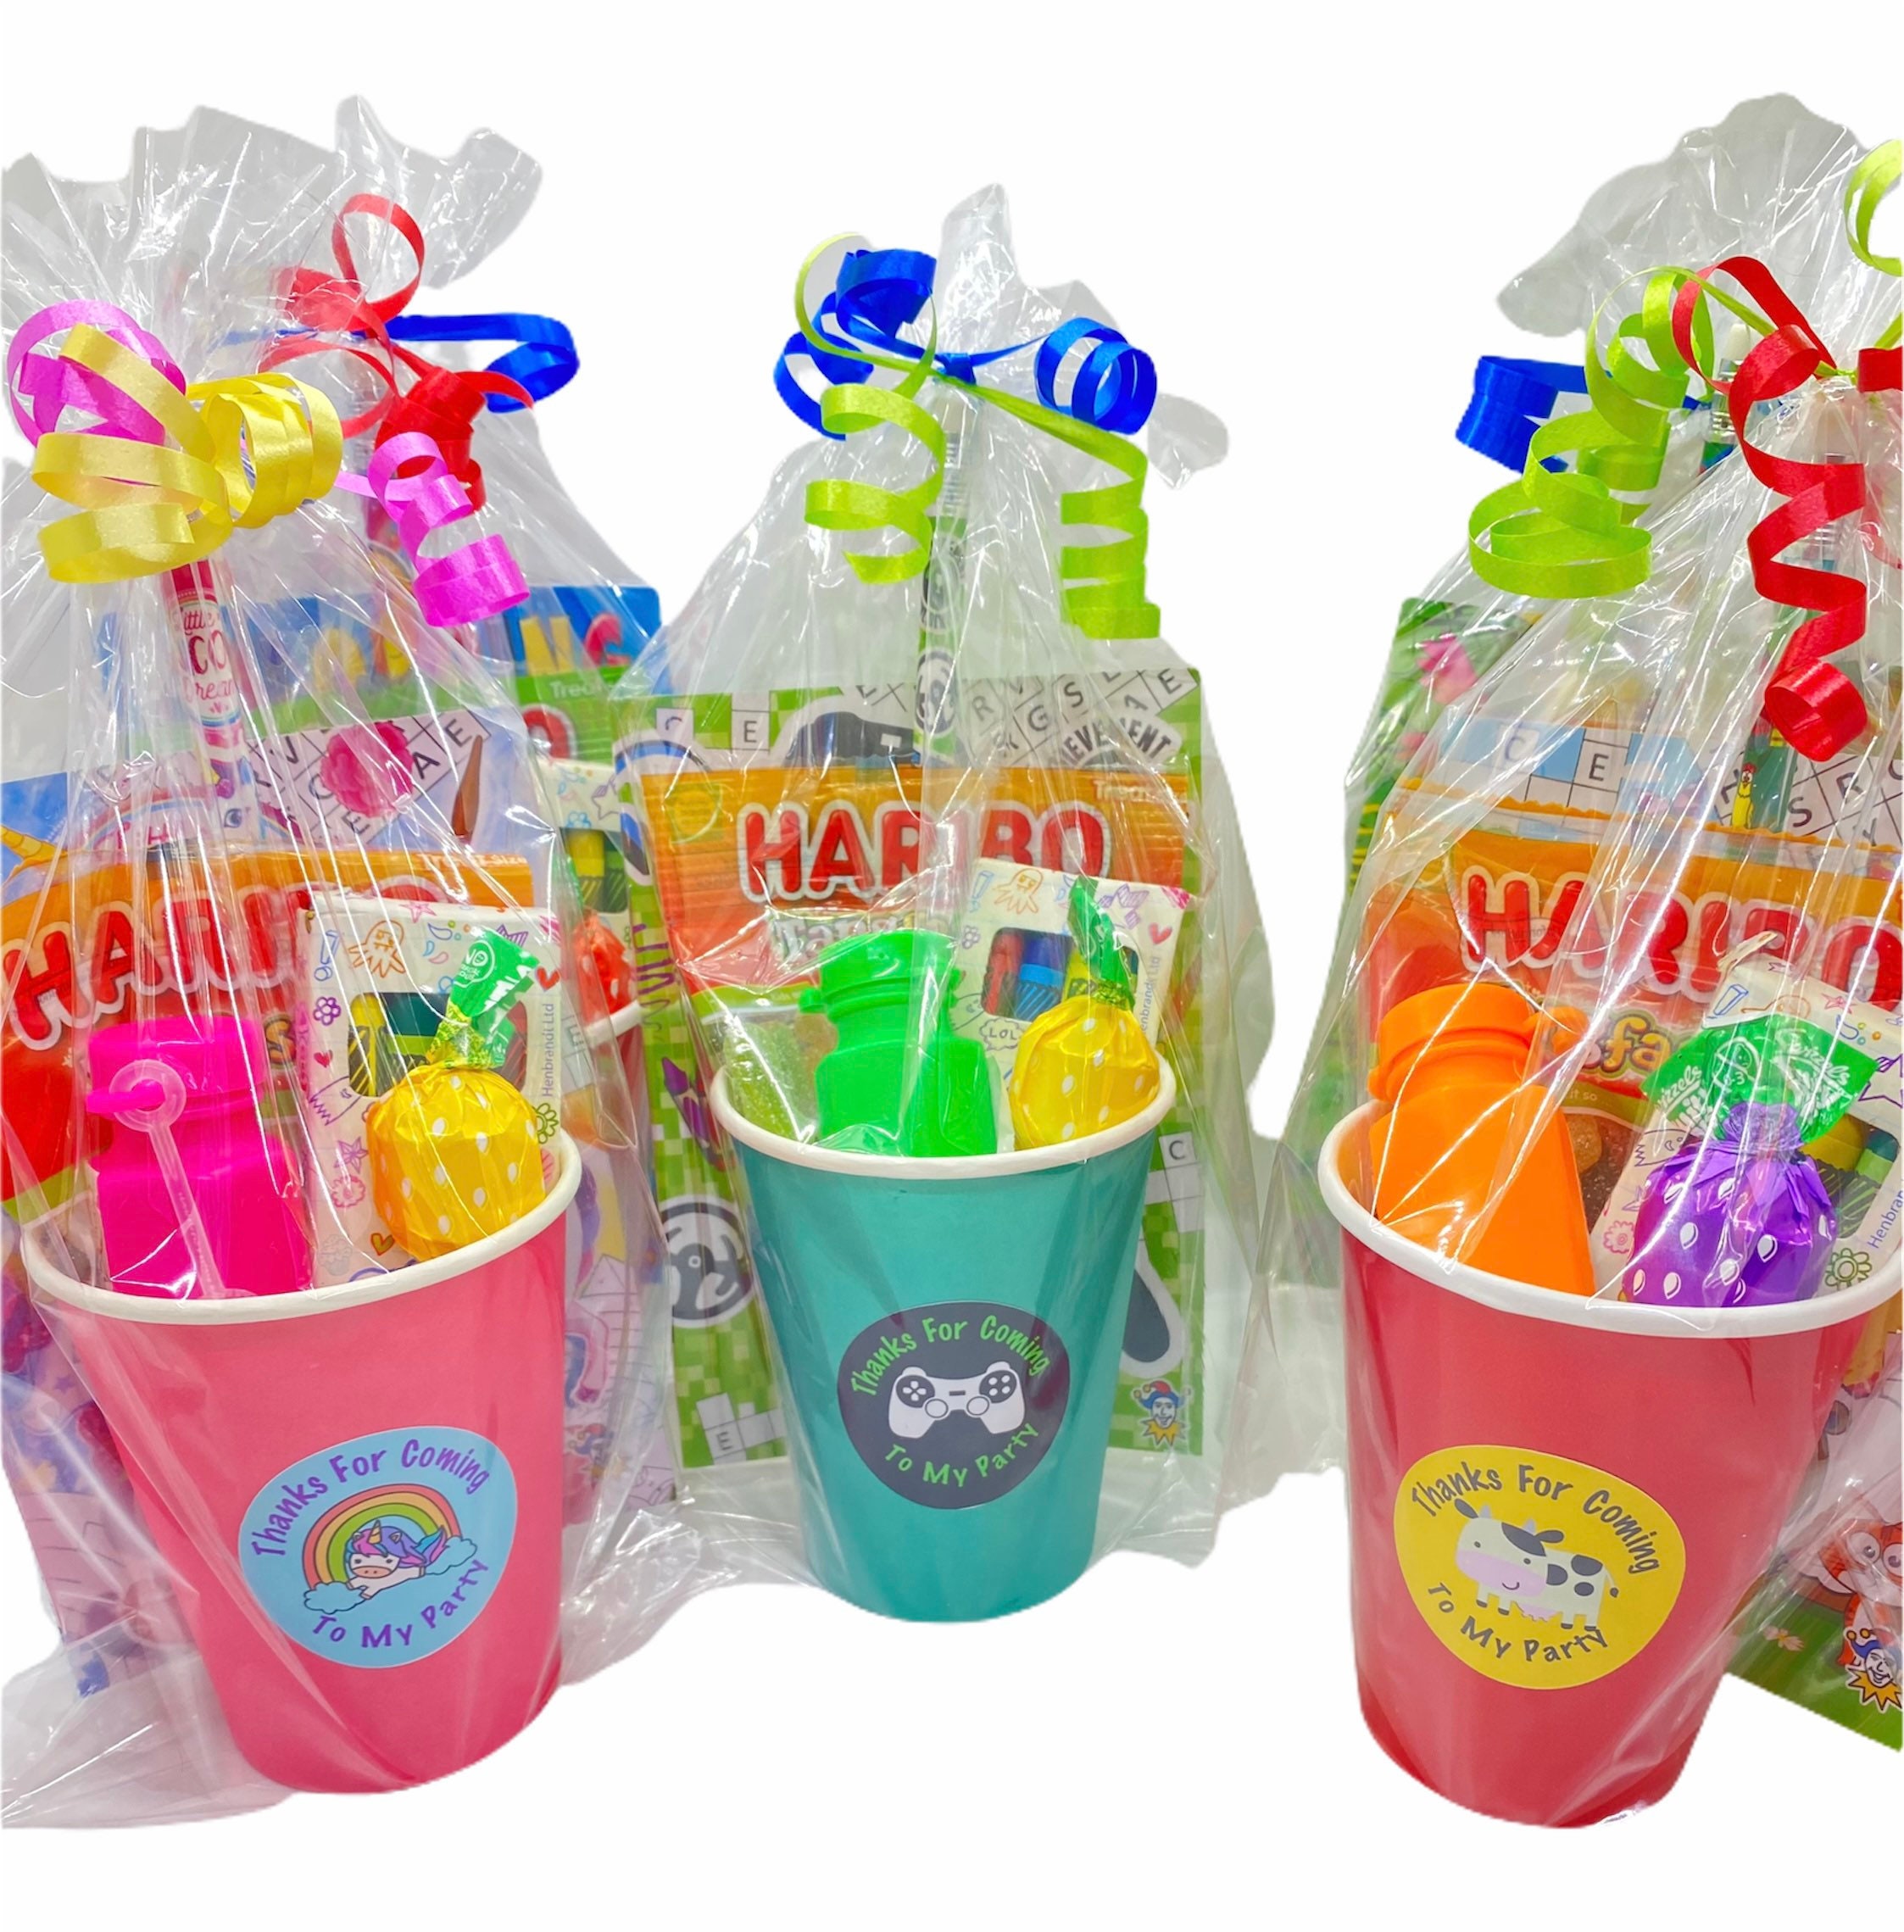 Share the Fun: Best Party Favors for Kids 3 to 15